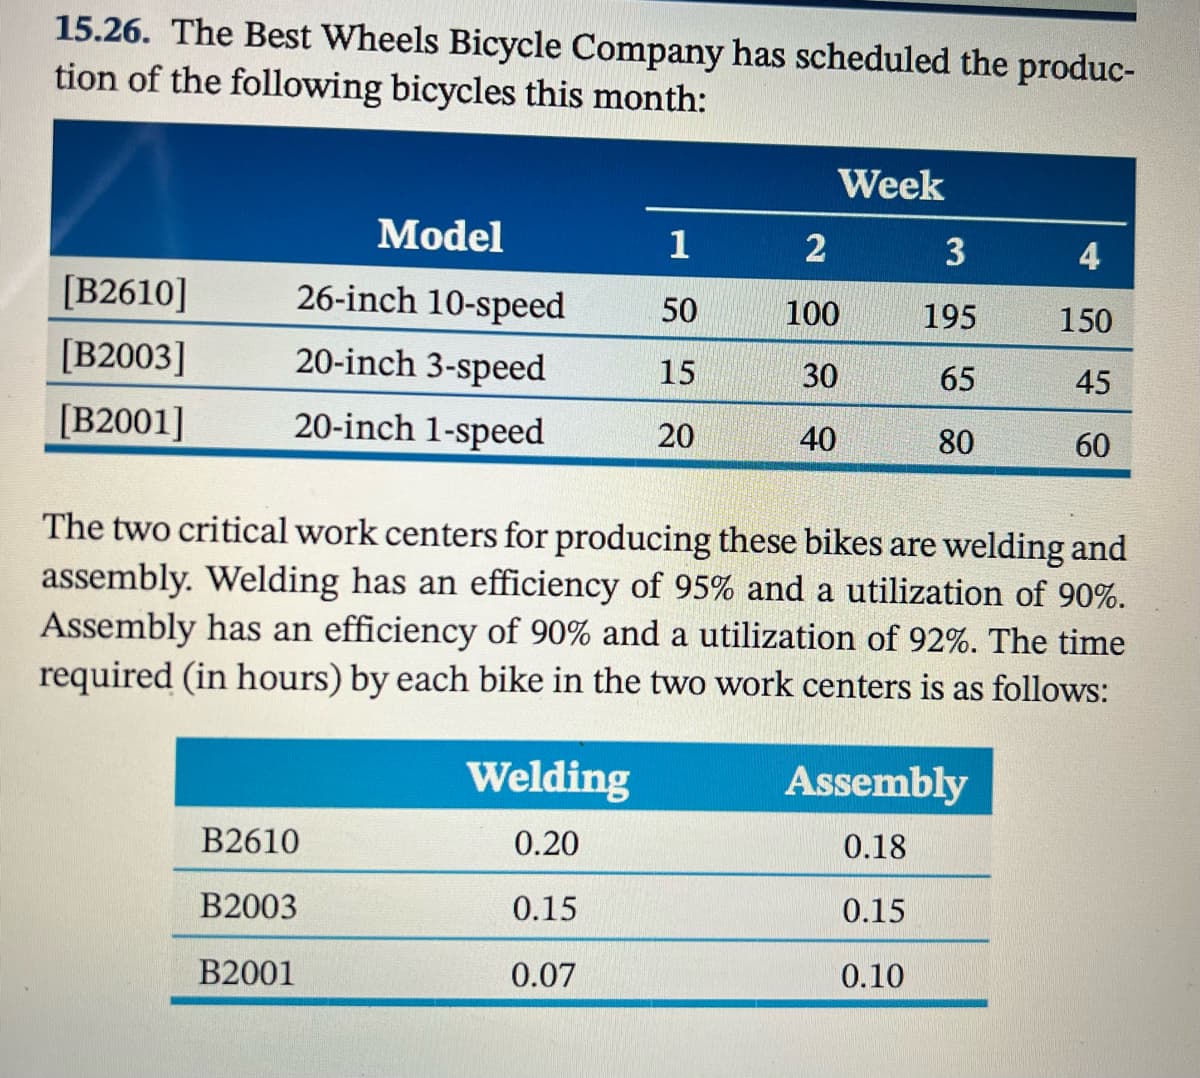 15.26. The Best Wheels Bicycle Company has scheduled the produc-
tion of the following bicycles this month:
Week
Model
1
2
3
4
[B2610]
26-inch 10-speed
50
100
195
150
[B2003]
20-inch 3-speed
15
30
65
45
[B2001]
20-inch 1-speed
20
40
80
60
The two critical work centers for producing these bikes are welding and
assembly. Welding has an efficiency of 95% and a utilization of 90%.
Assembly has an efficiency of 90% and a utilization of 92%. The time
required (in hours) by each bike in the two work centers is as follows:
Welding
Assembly
B2610
0.20
0.18
B2003
0.15
0.15
B2001
0.07
0.10
